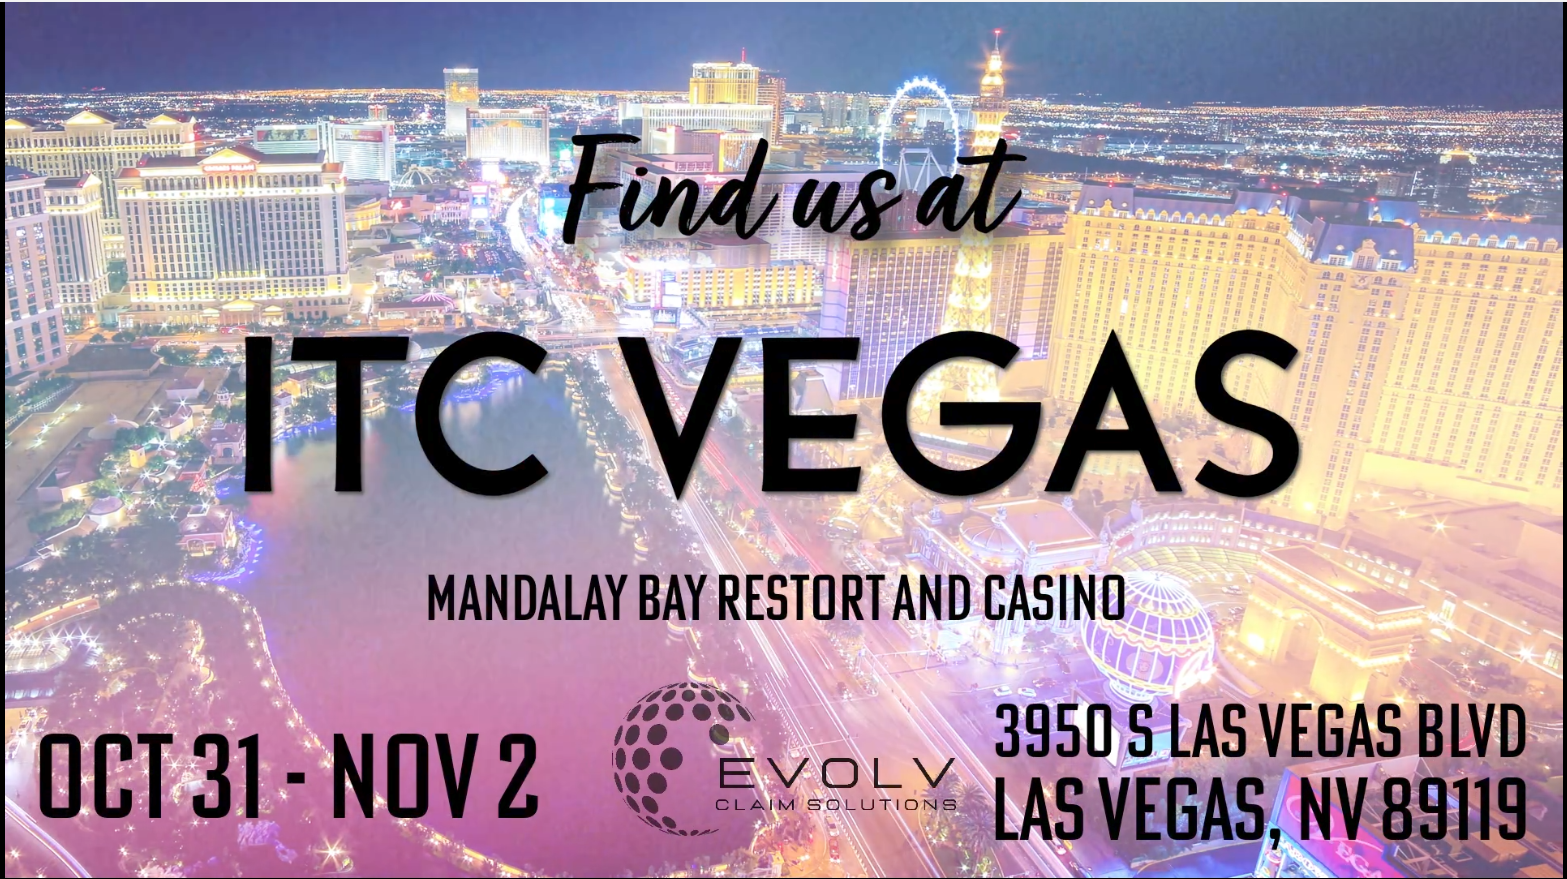 Evolv Claim Solutions will be at ITC Vegas!